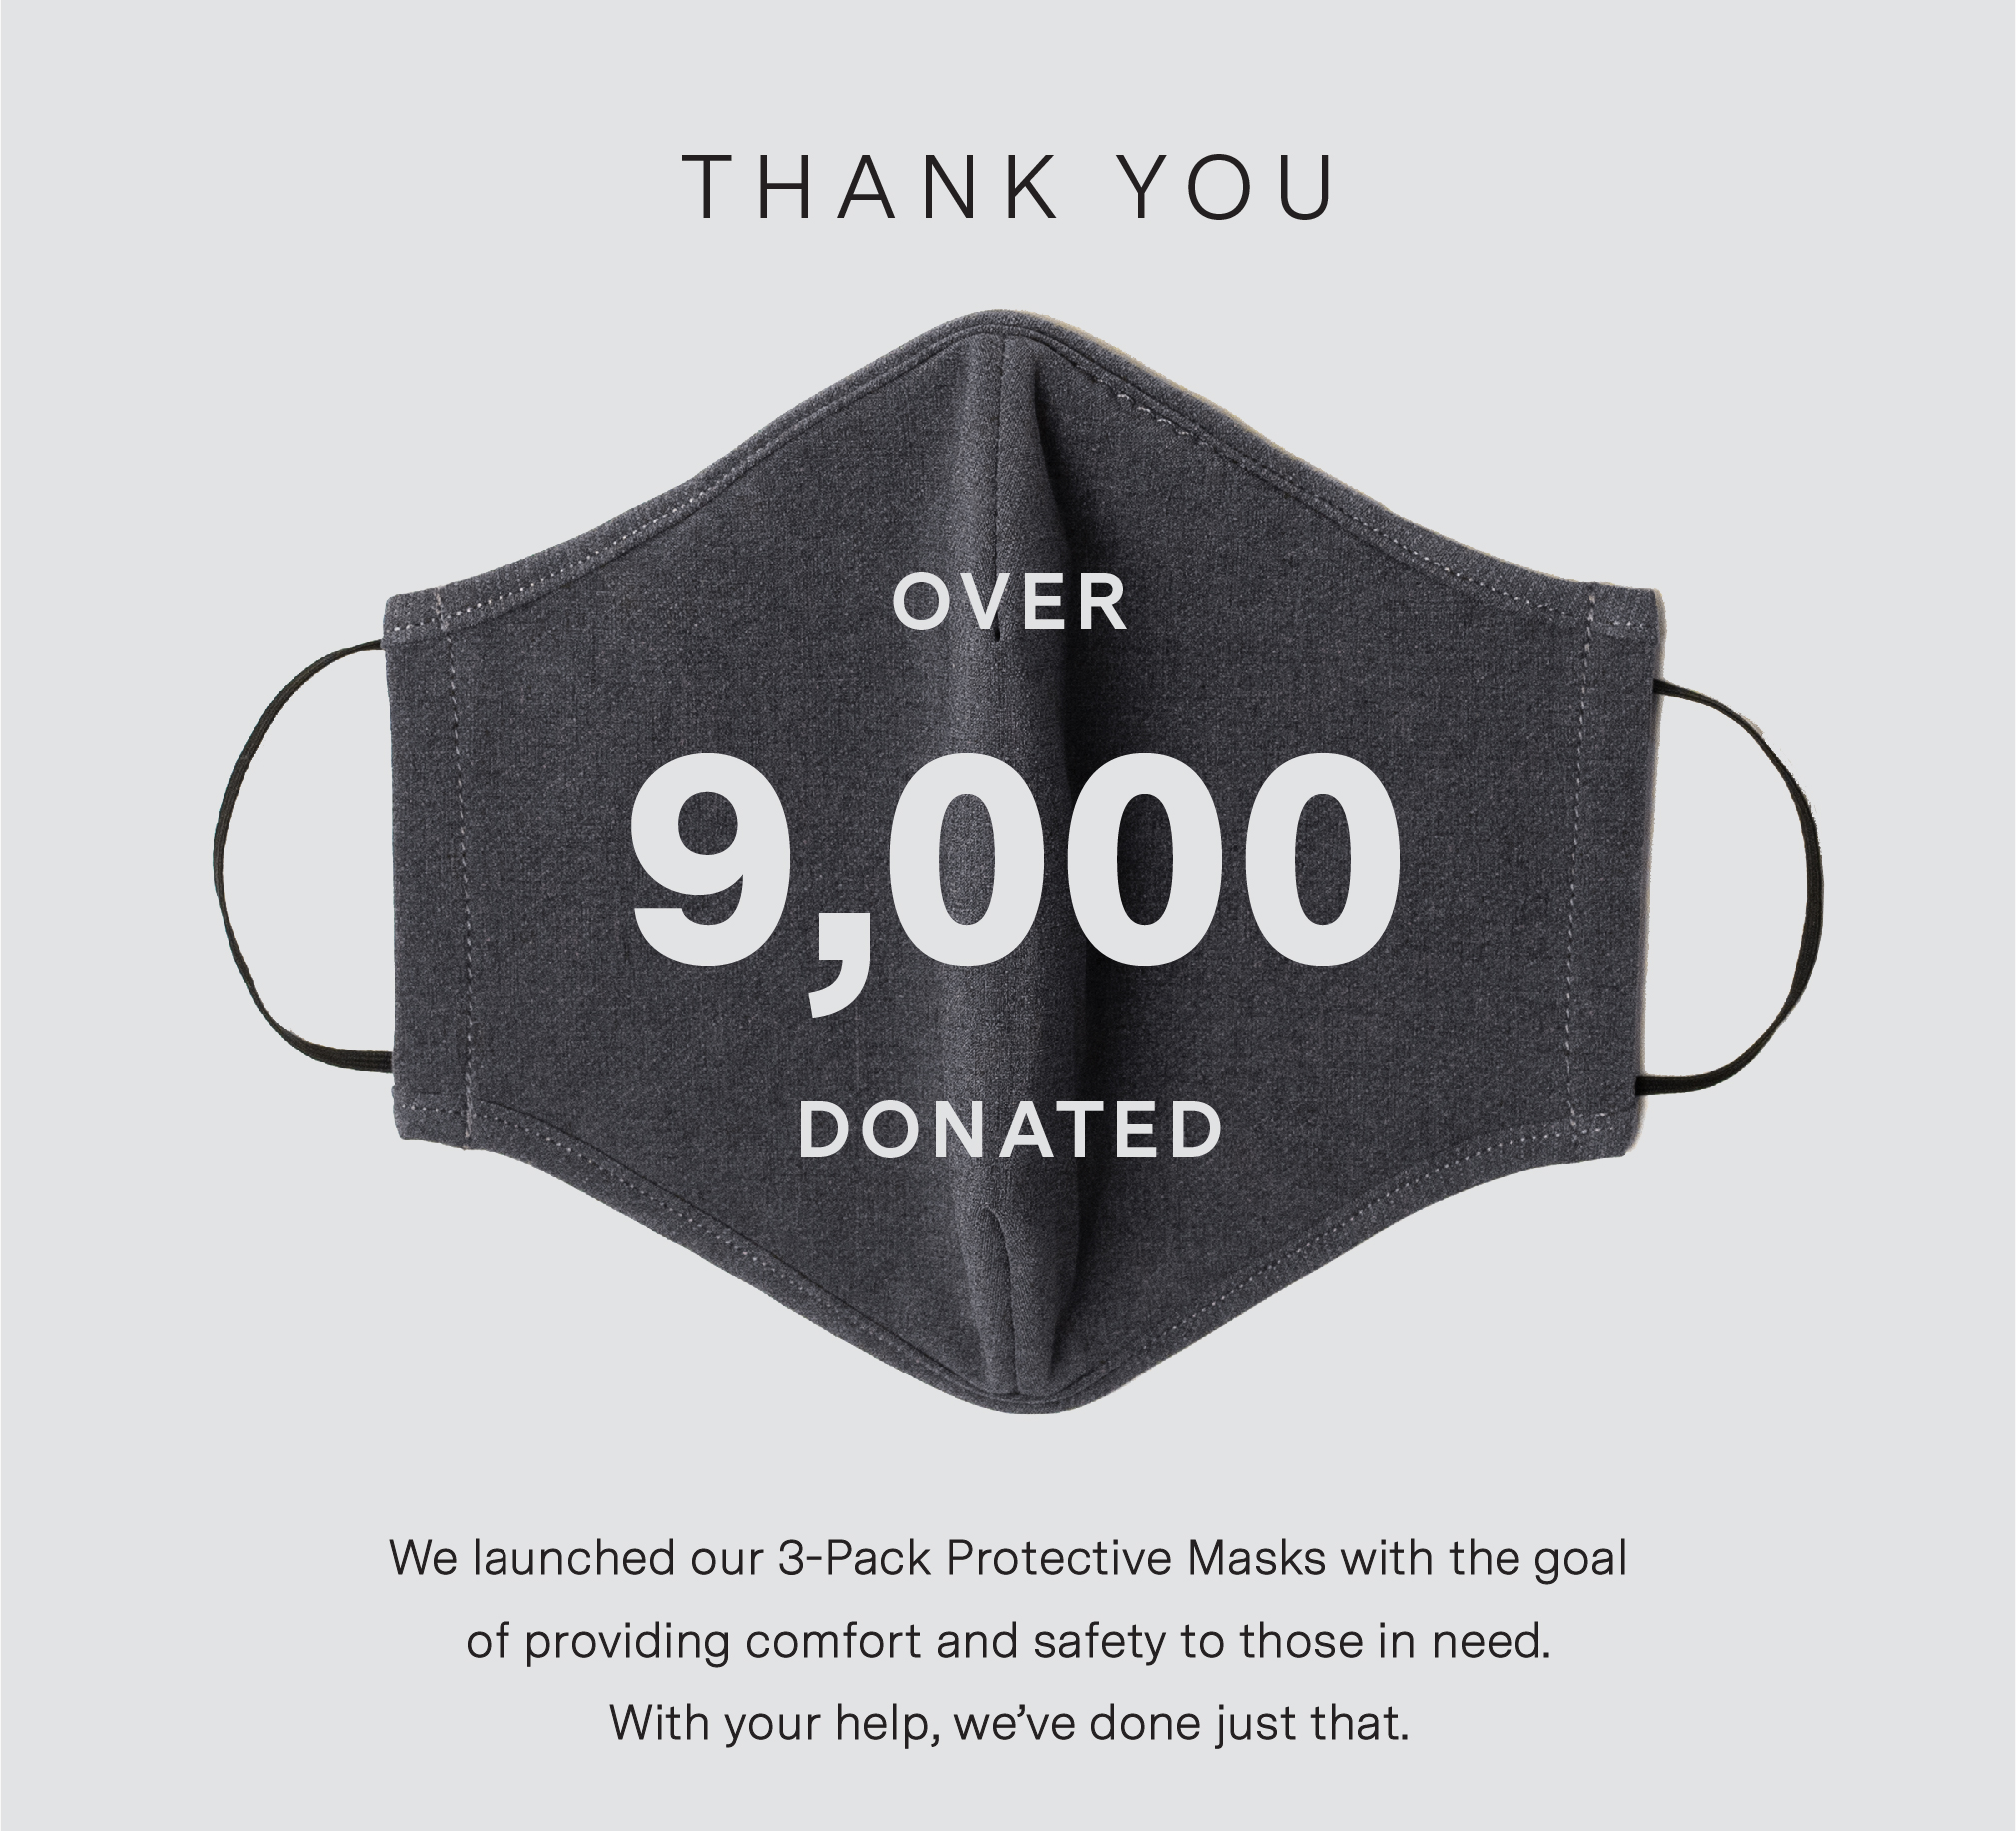 THANK YOU. OVER 9,000 MASKS DONATED. We launched our 3-Pack Protective Masks with the goal of providing comfort and safety to those in need. With your help, we''ve done just that.